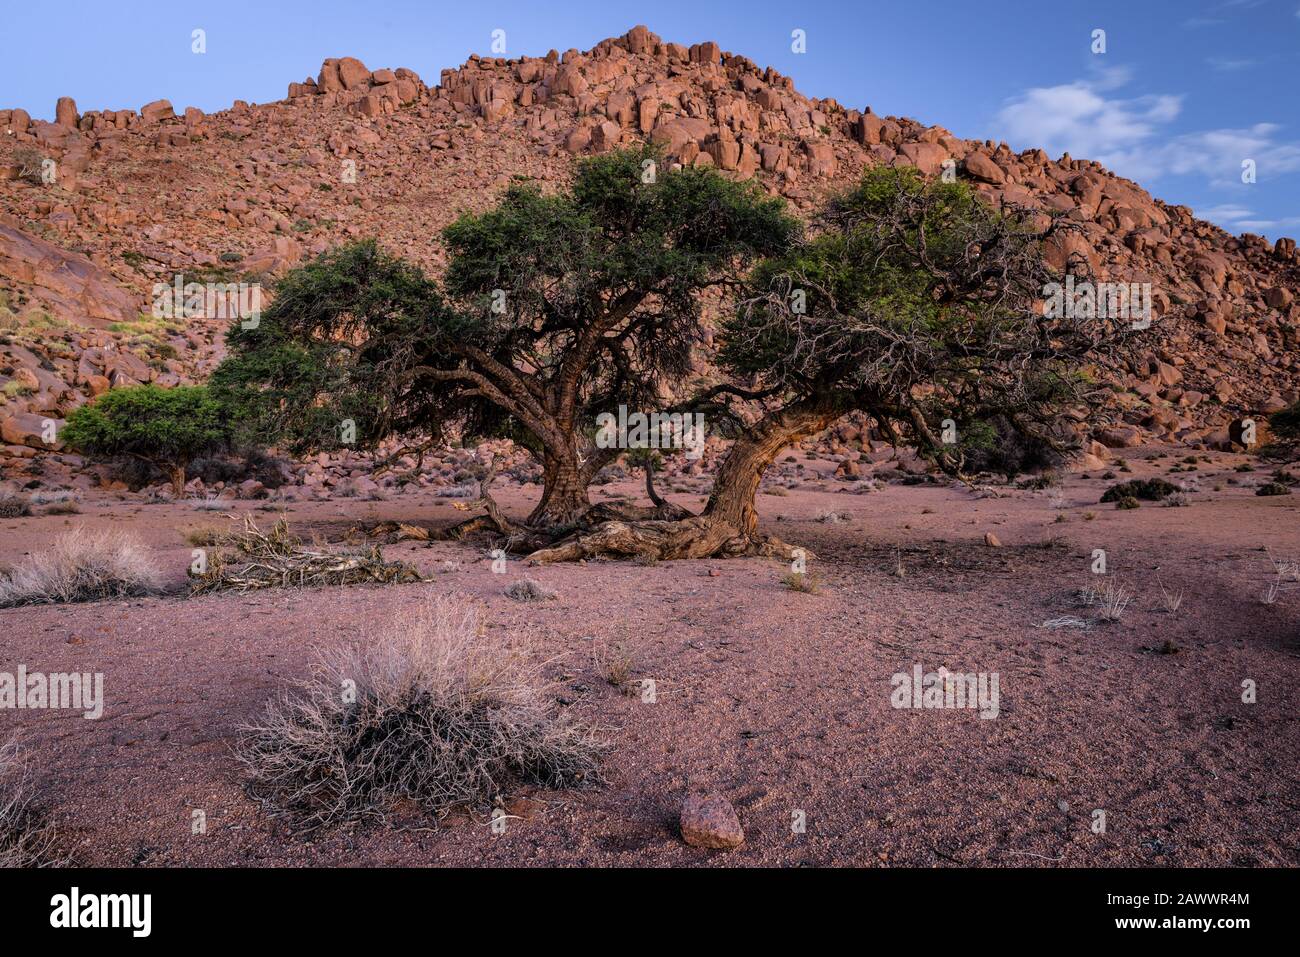 Acacia trees in Namibia's desert are framed by a rocky outcrop in the southern African country Stock Photo